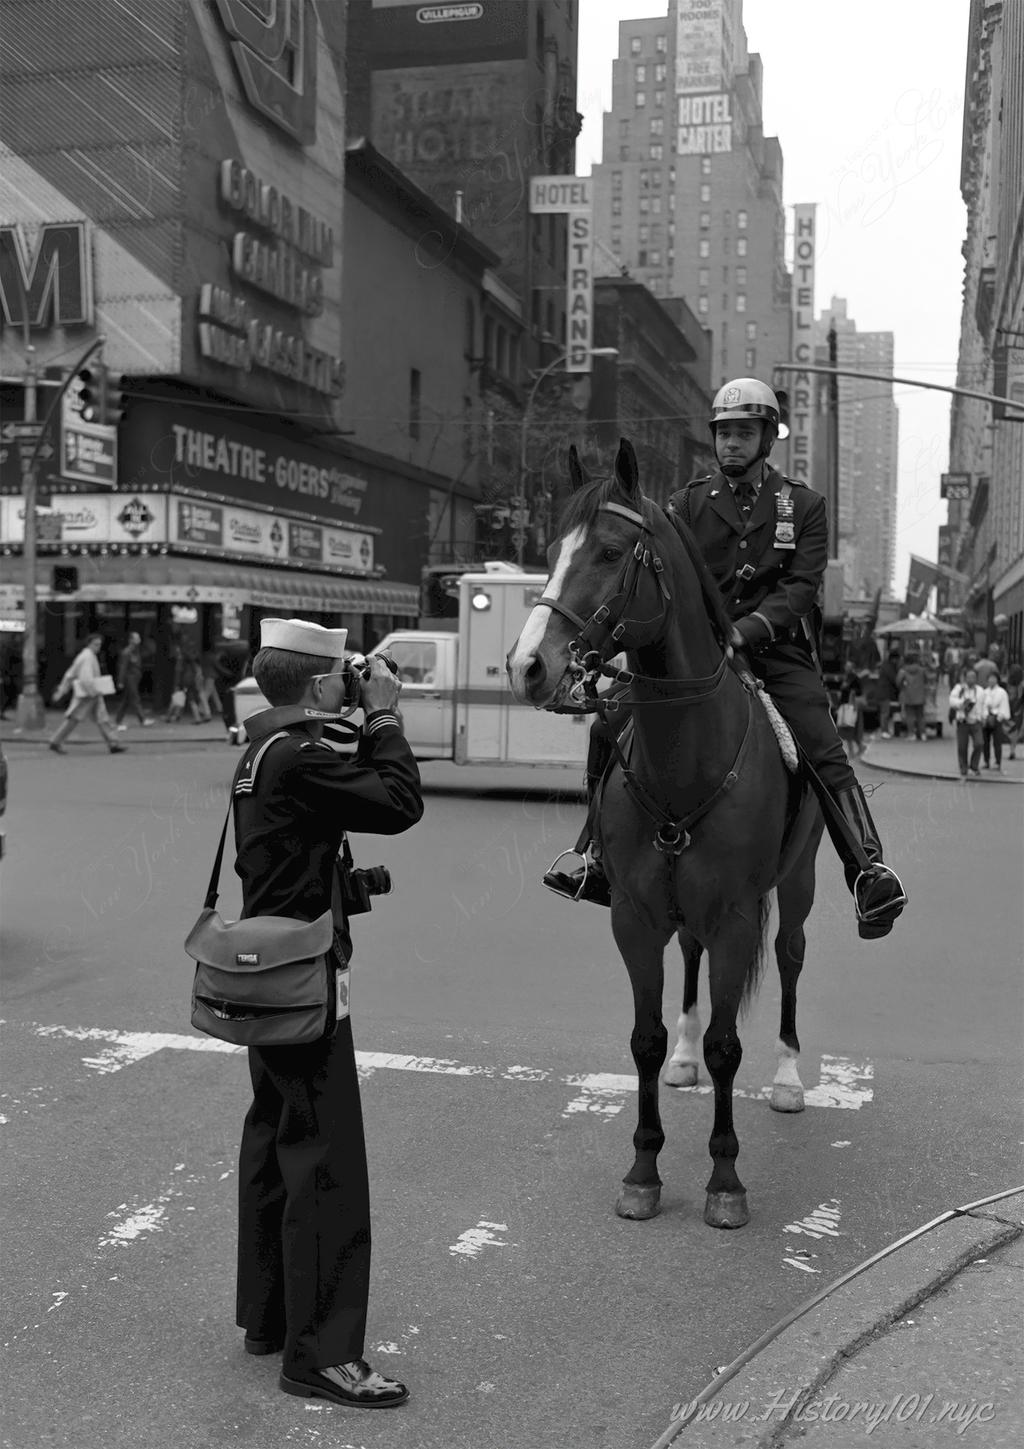 A sailor on liberty during Fleet Week photographs a New York City policeman on horseback in Times Square.